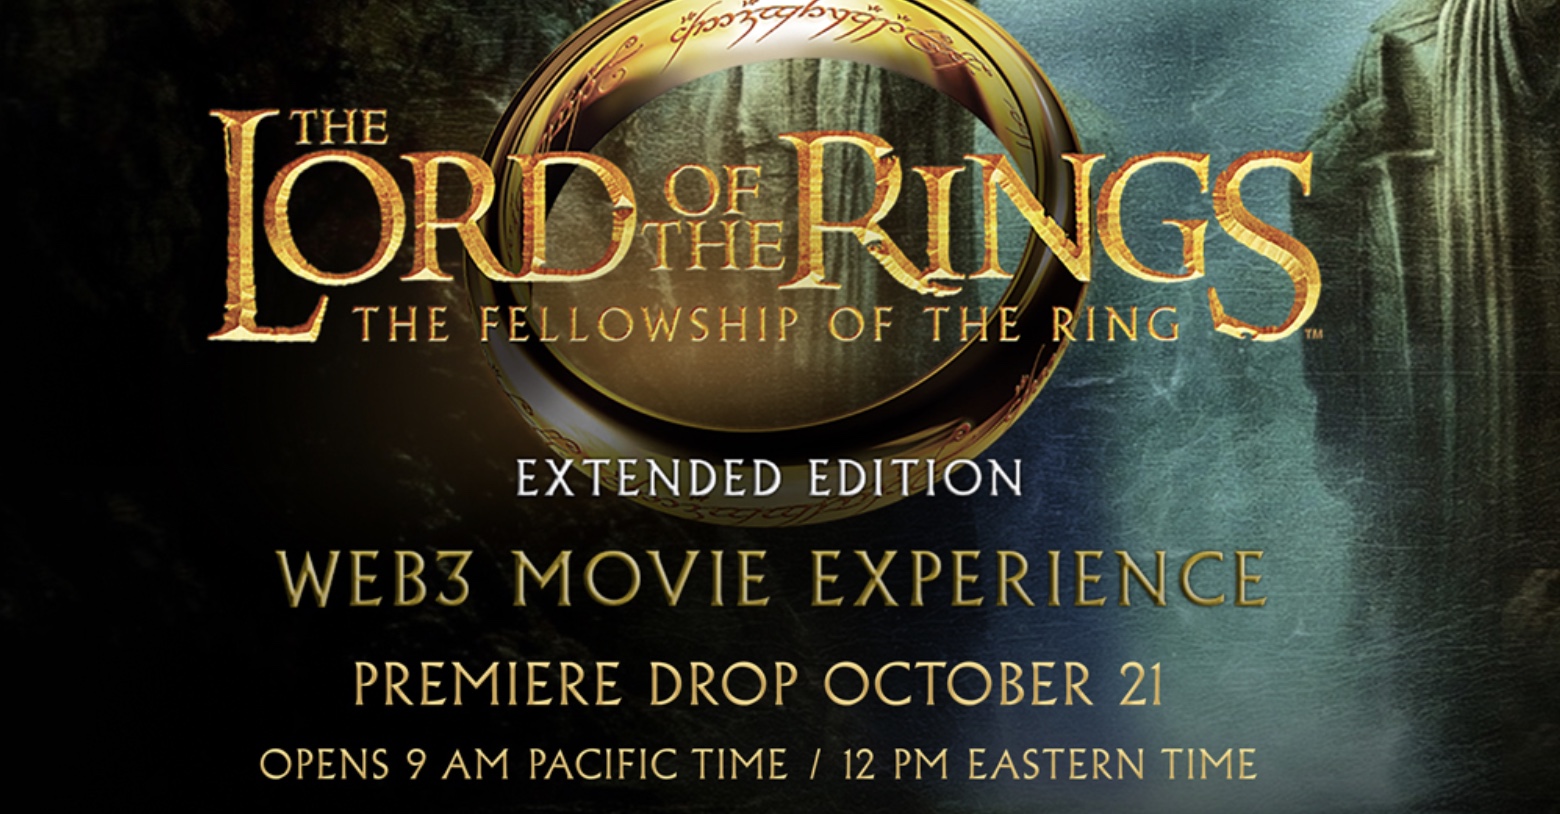 WARNER BROS. HOME ENTERTAINMENT AND ELUVIO ANNOUNCE THE LORD OF THE RINGS: THE  FELLOWSHIP OF THE RING (EXTENDED EDITION) WEB3 MOVIE EXPERIENCE